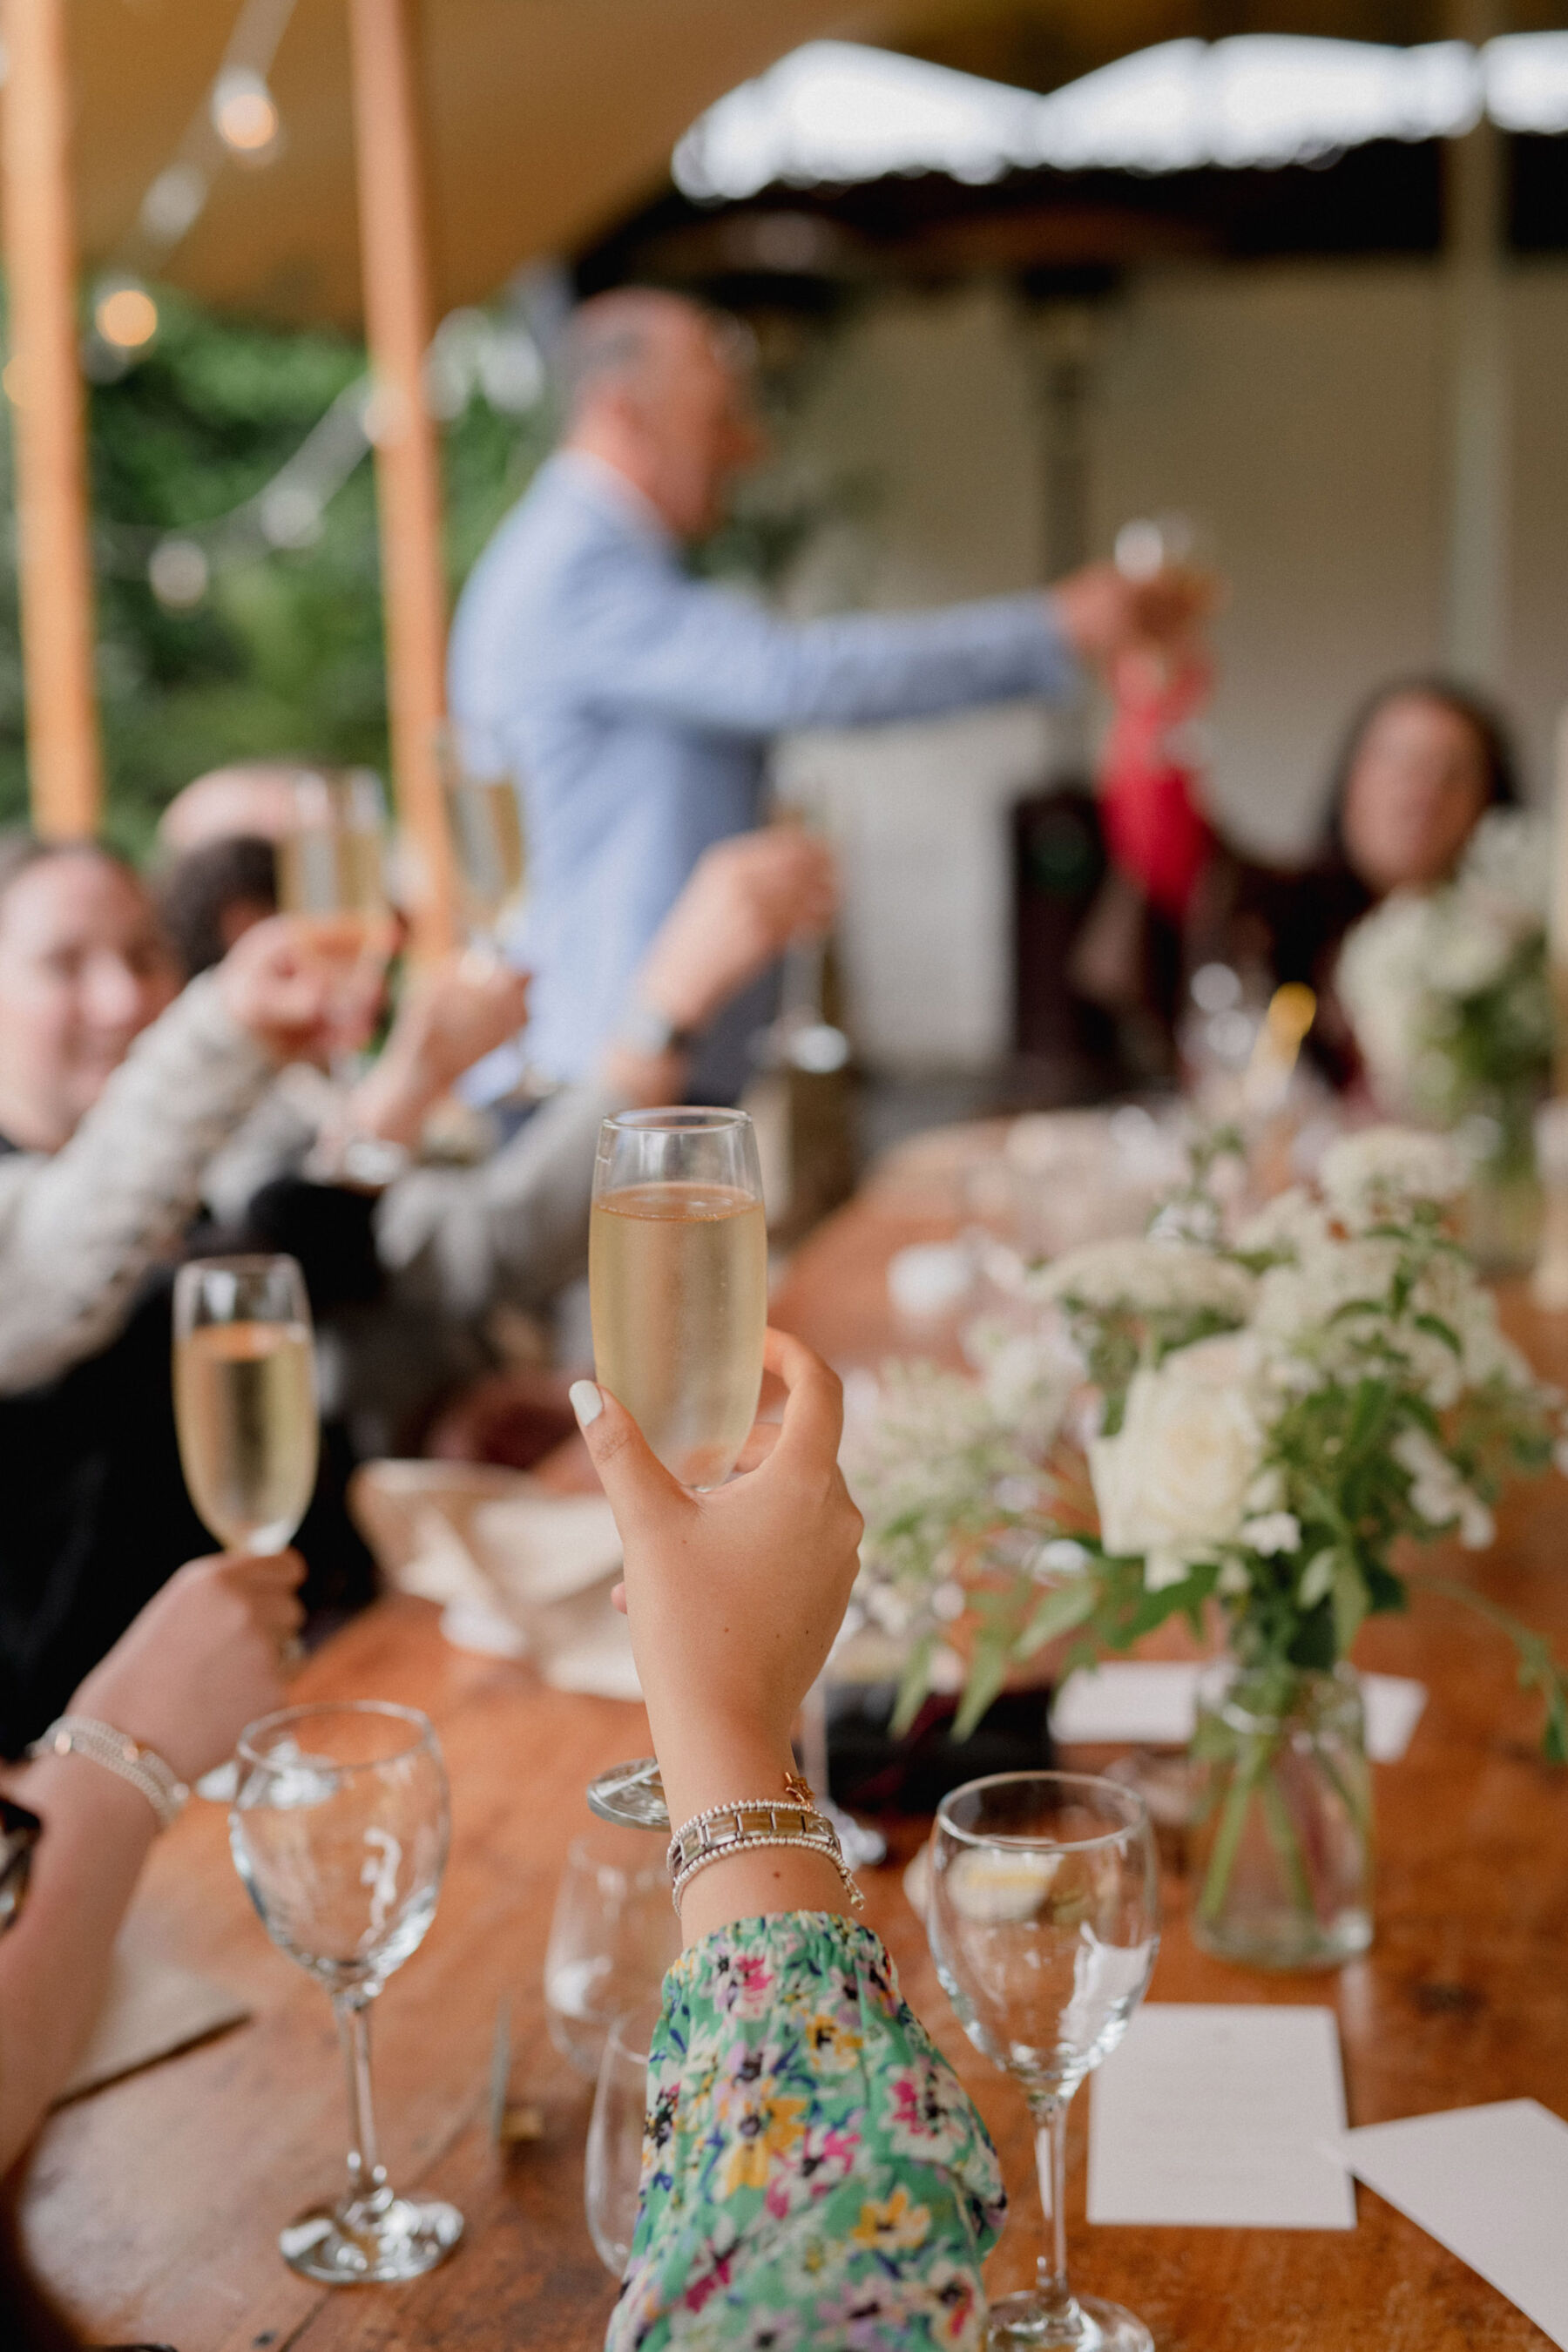 Hands raising glasses of champagne at a wedding. Lyra & Moth Photography.